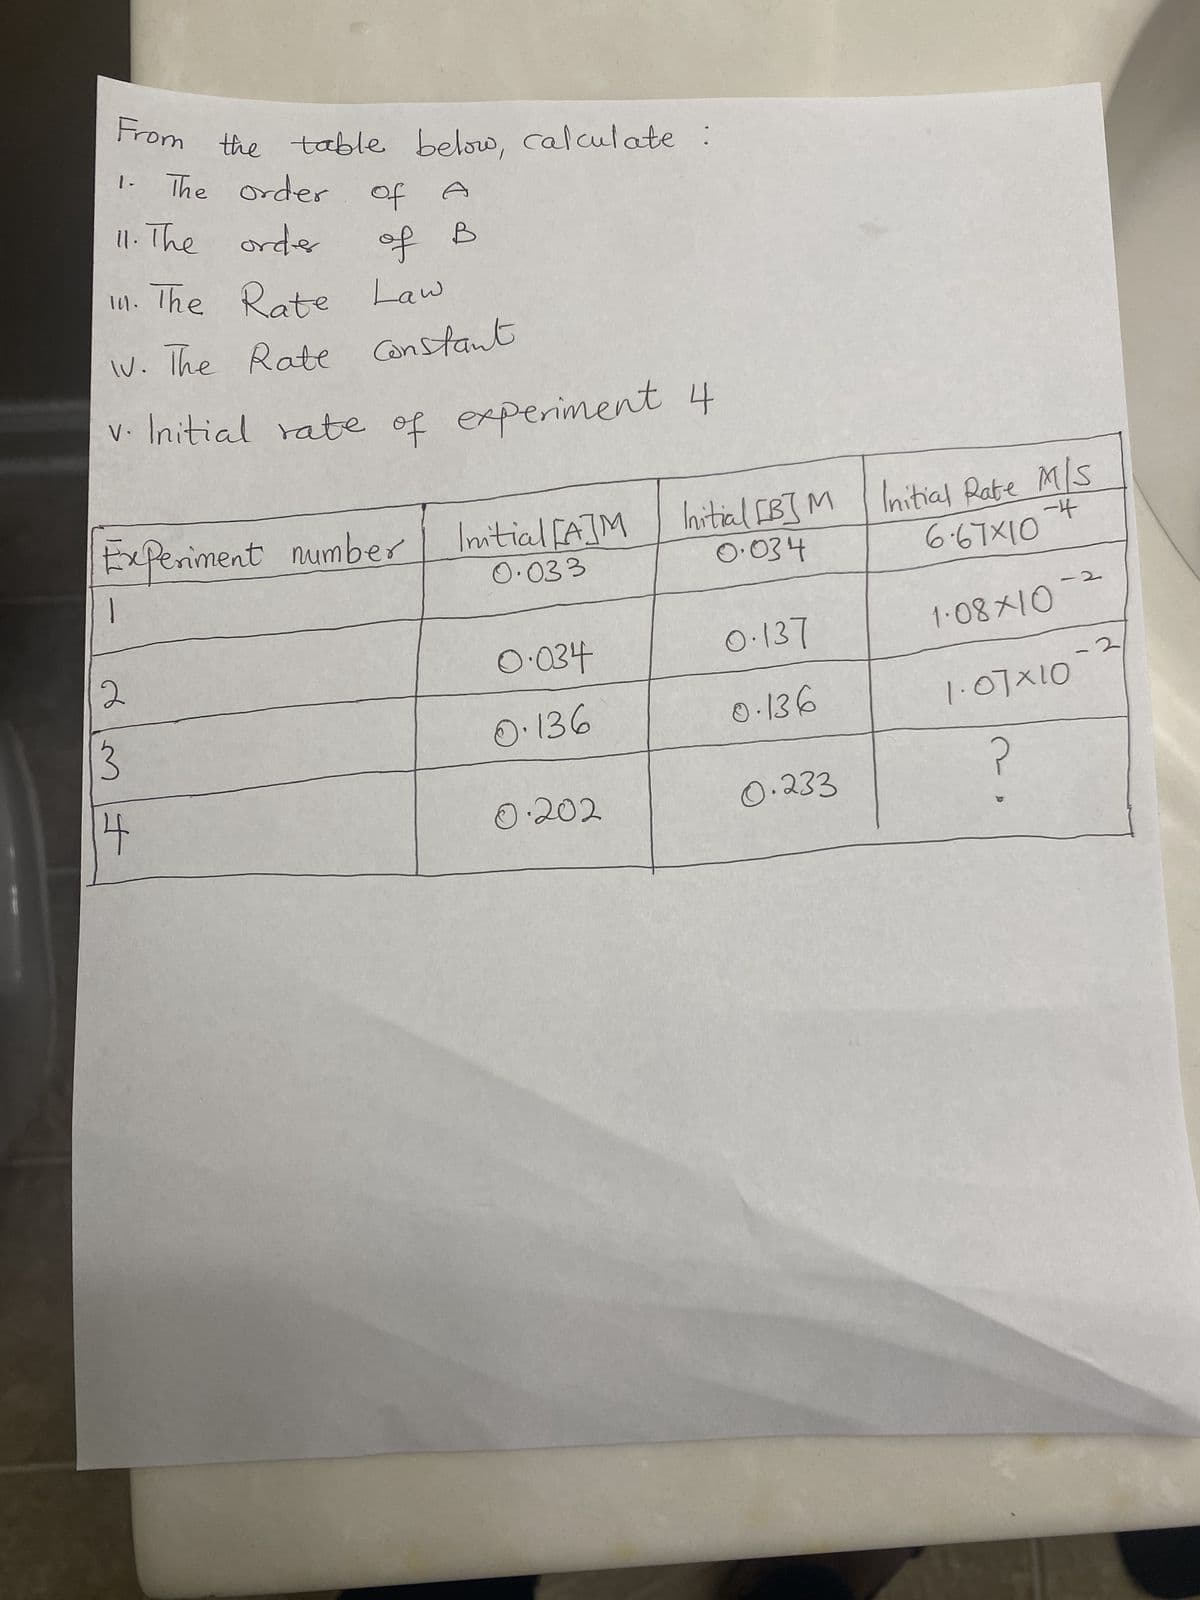 From the table below, calculate :
1.
The order of A
11. The order
of B
111. The Rate Law
1. The Rate Constant
v. Initial rate of experiment 4
Experiment number
Initial [A]M
-
1
0.033
Initial [B]M Initial Rate M/S
0.034
-4
6.67×10
-2
2
3
0.034
0.137
1.08×10
-2
0.136
0.136
1.07×10
4
0.202
0.233
?